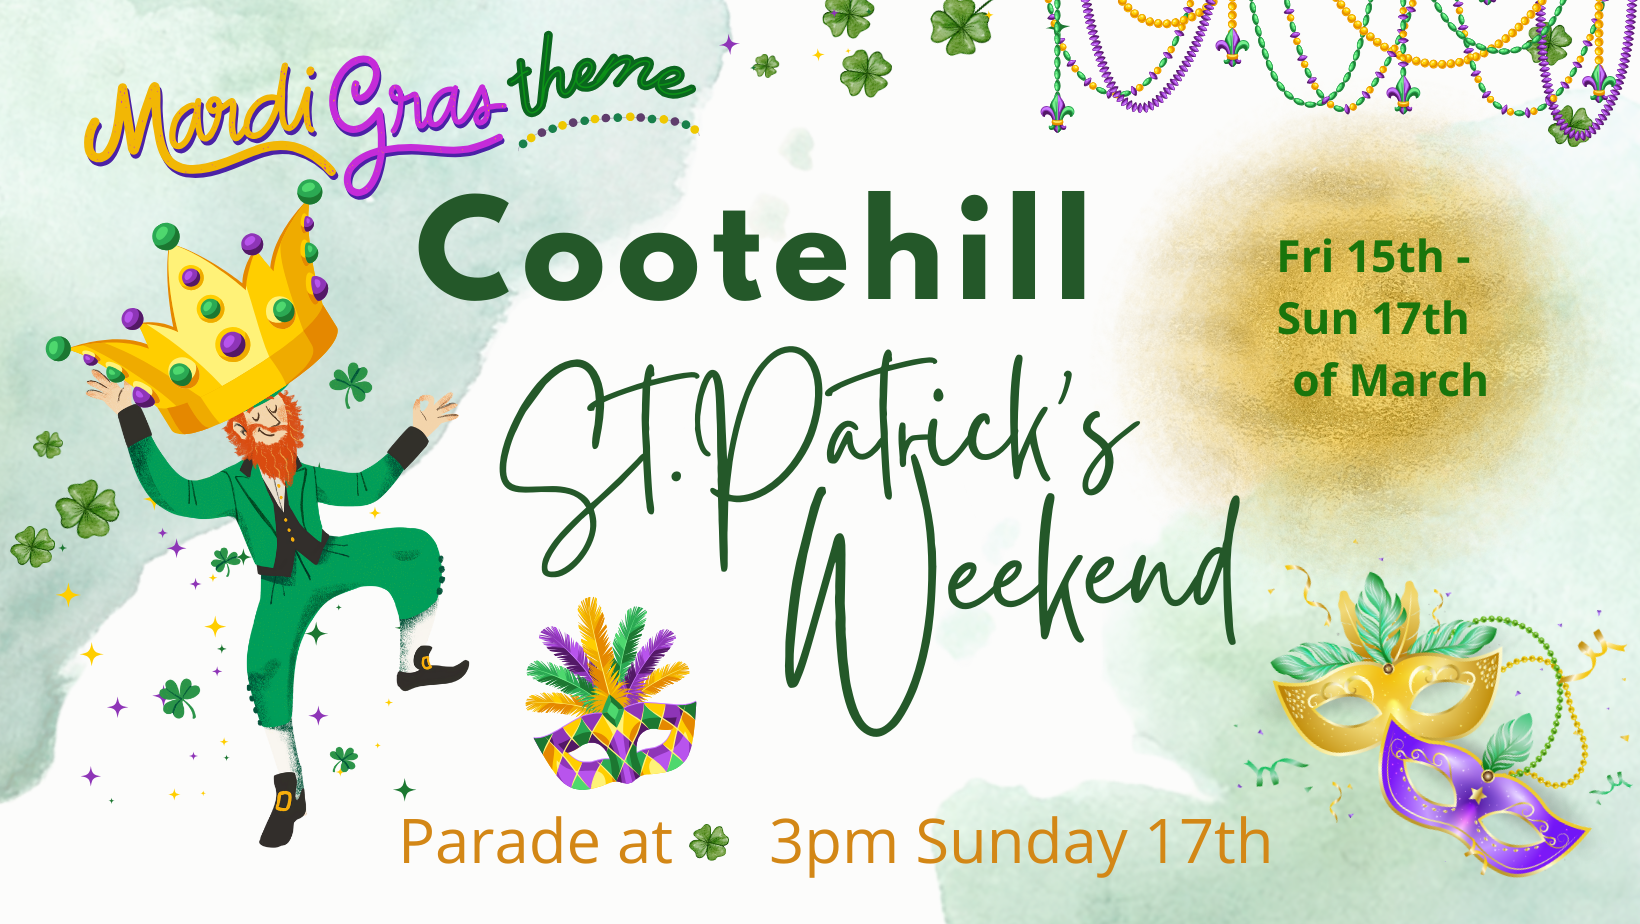 Cootehill.ie, St Patrick's Day Parade, Entry Forms, Mardi Gras Theme